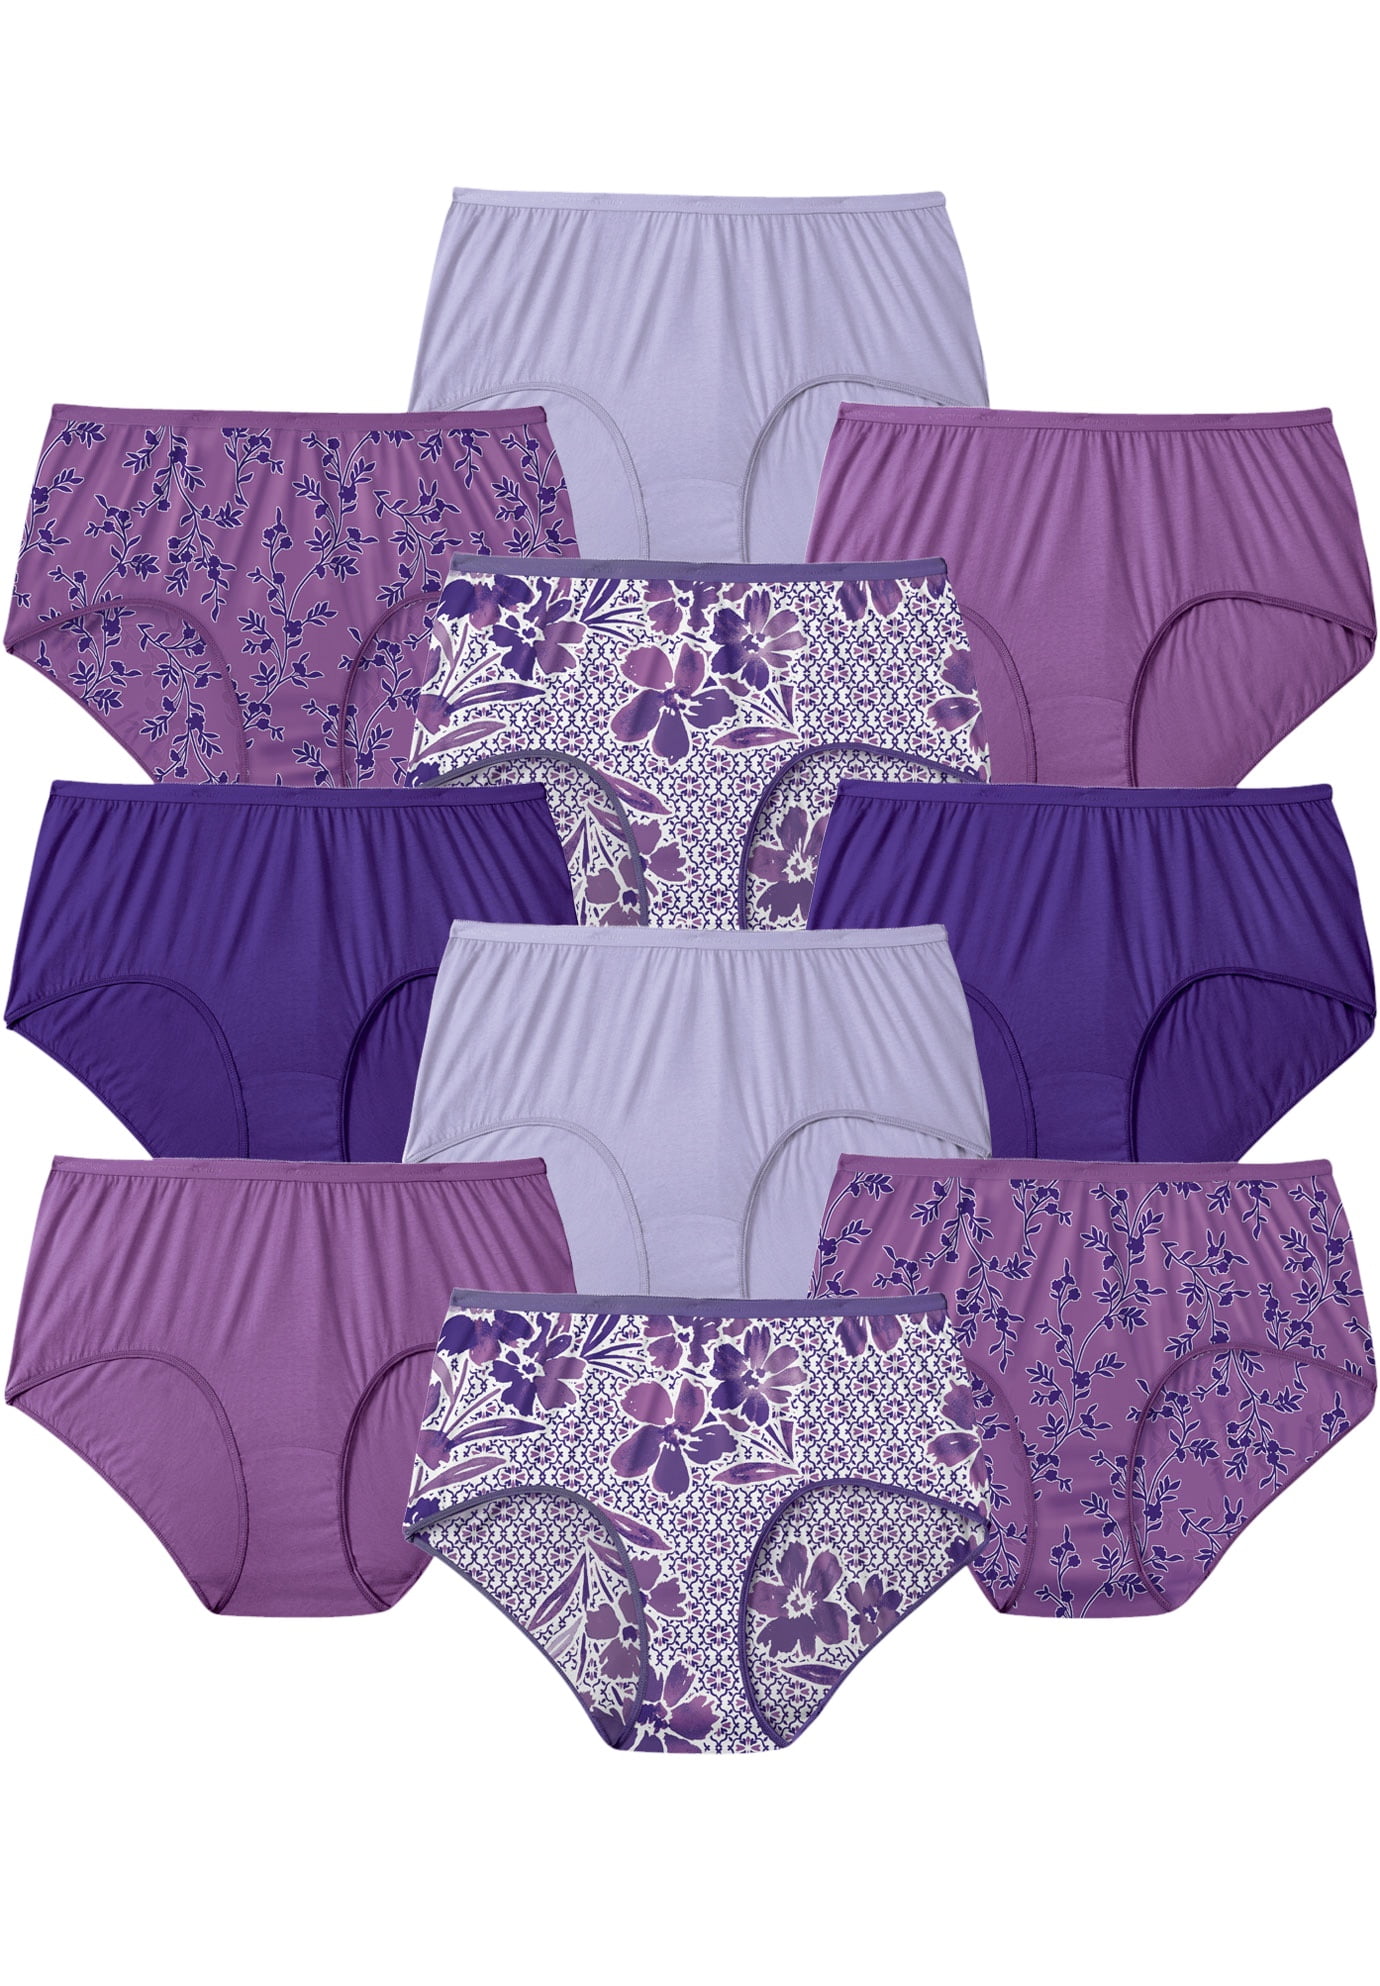 Plus Size Women's Cotton Brief 10-Pack by Comfort Choice in Pastel Pack  (Size 9) Underwear - Yahoo Shopping